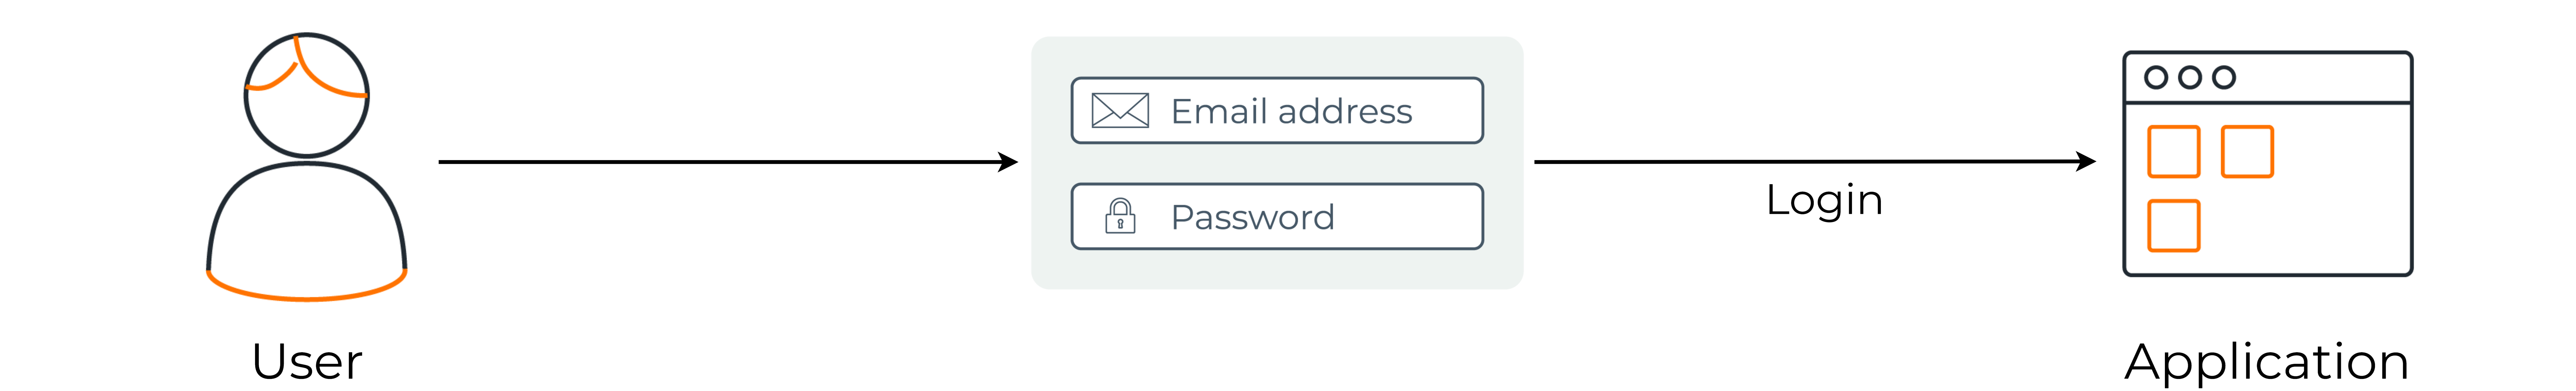 Configuring only username and password authentication